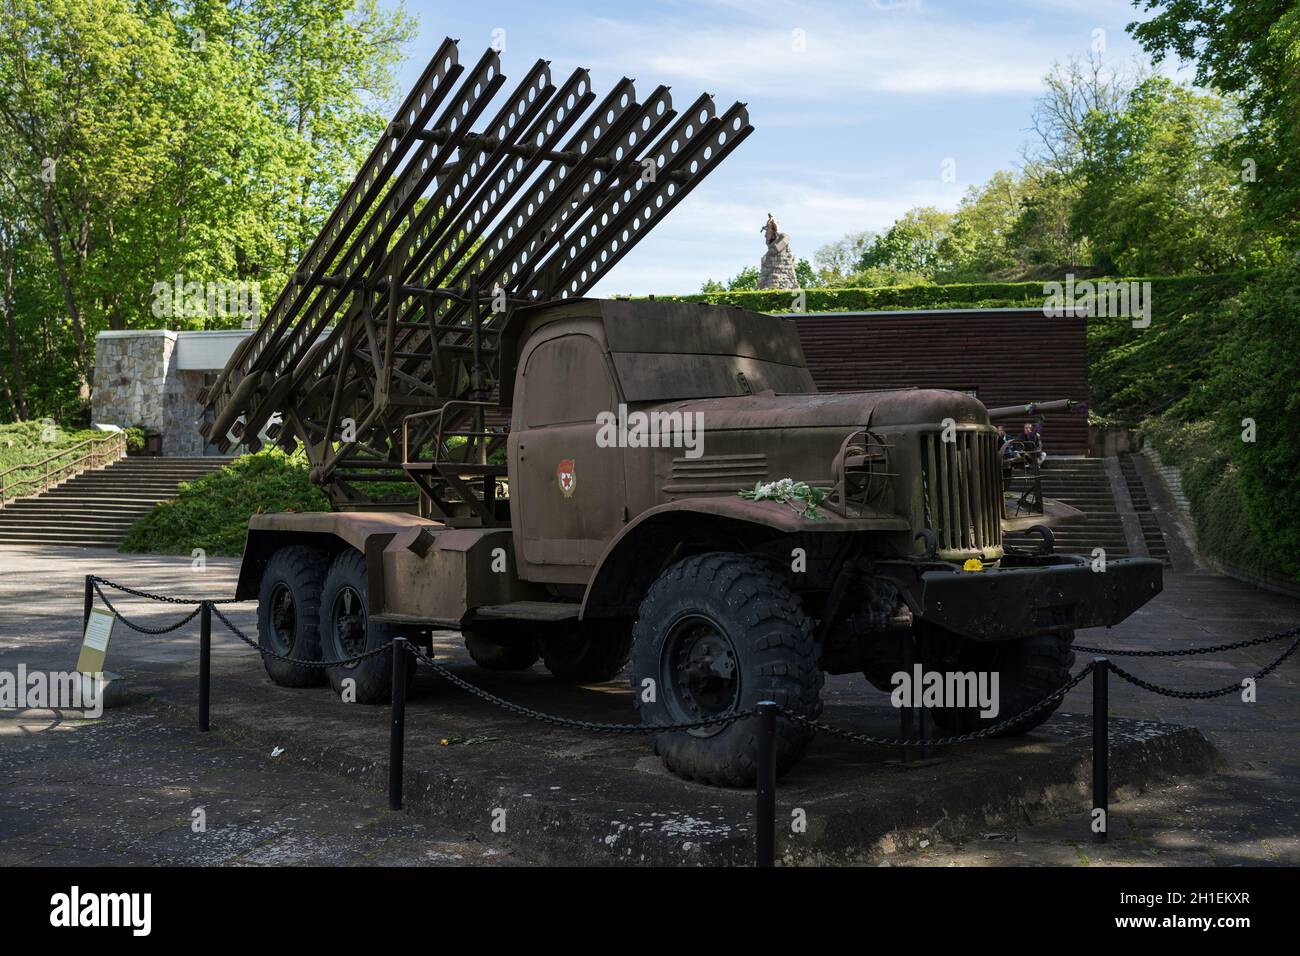 SEELOW, GERMANY - MAY 09, 2020: BM-13 Katyusha multiple rocket launcher, based on a ZIL-157 truck at the site of the Battle of the Seelow Heights duri Stock Photo